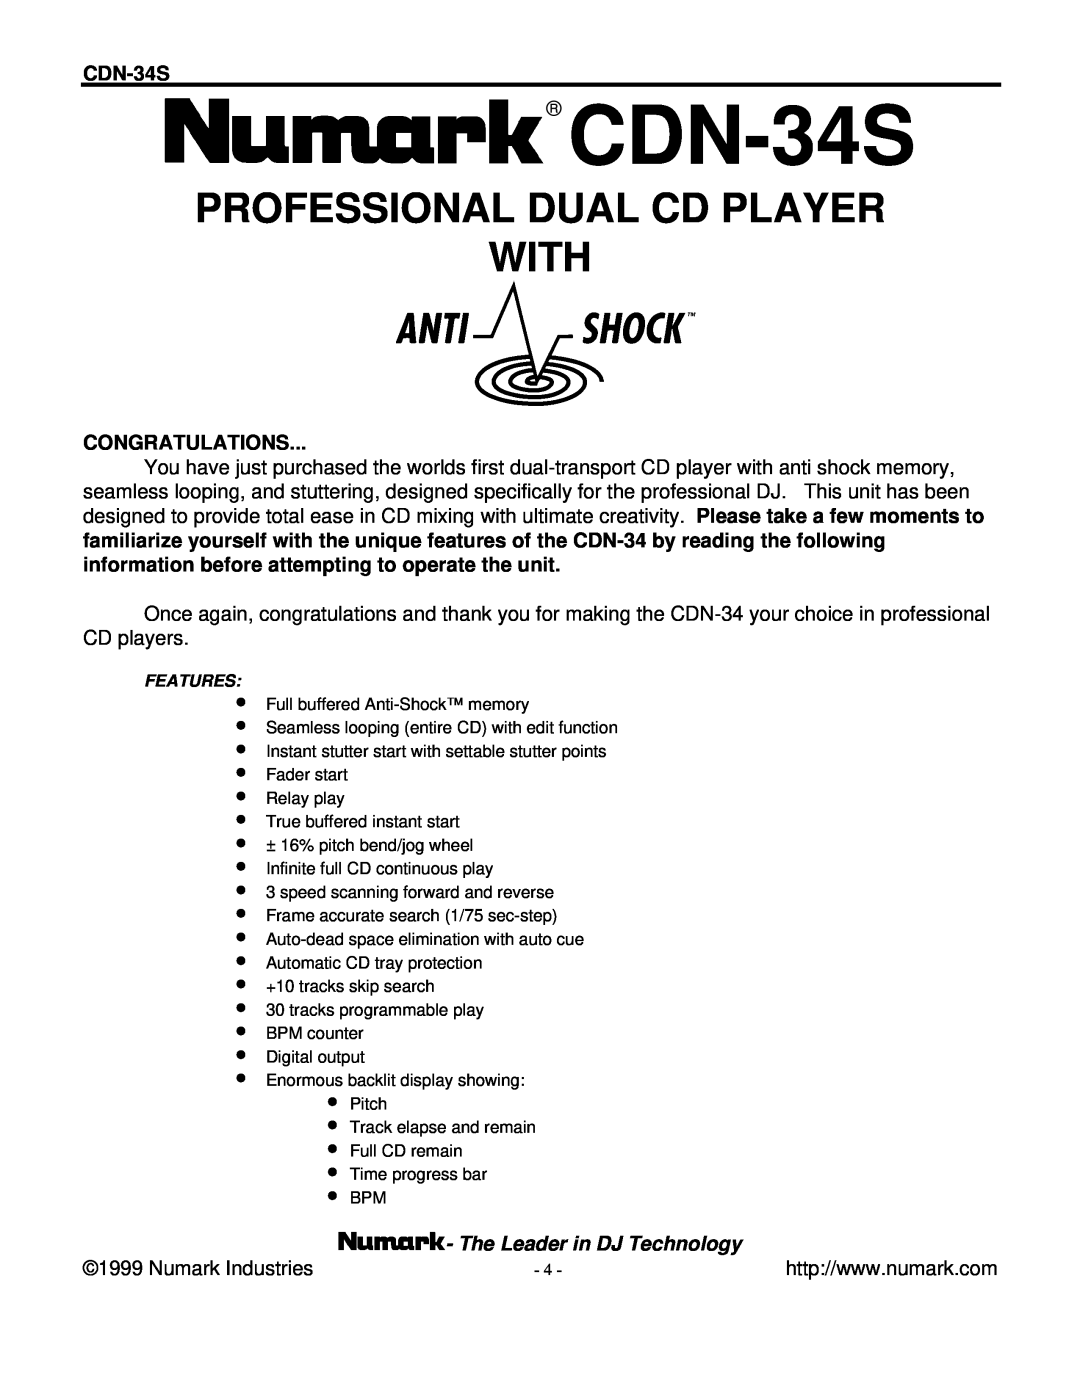 Numark Industries CDN-34S manual Congratulations, Professional Dual Cd Player With, The Leader in DJ Technology 